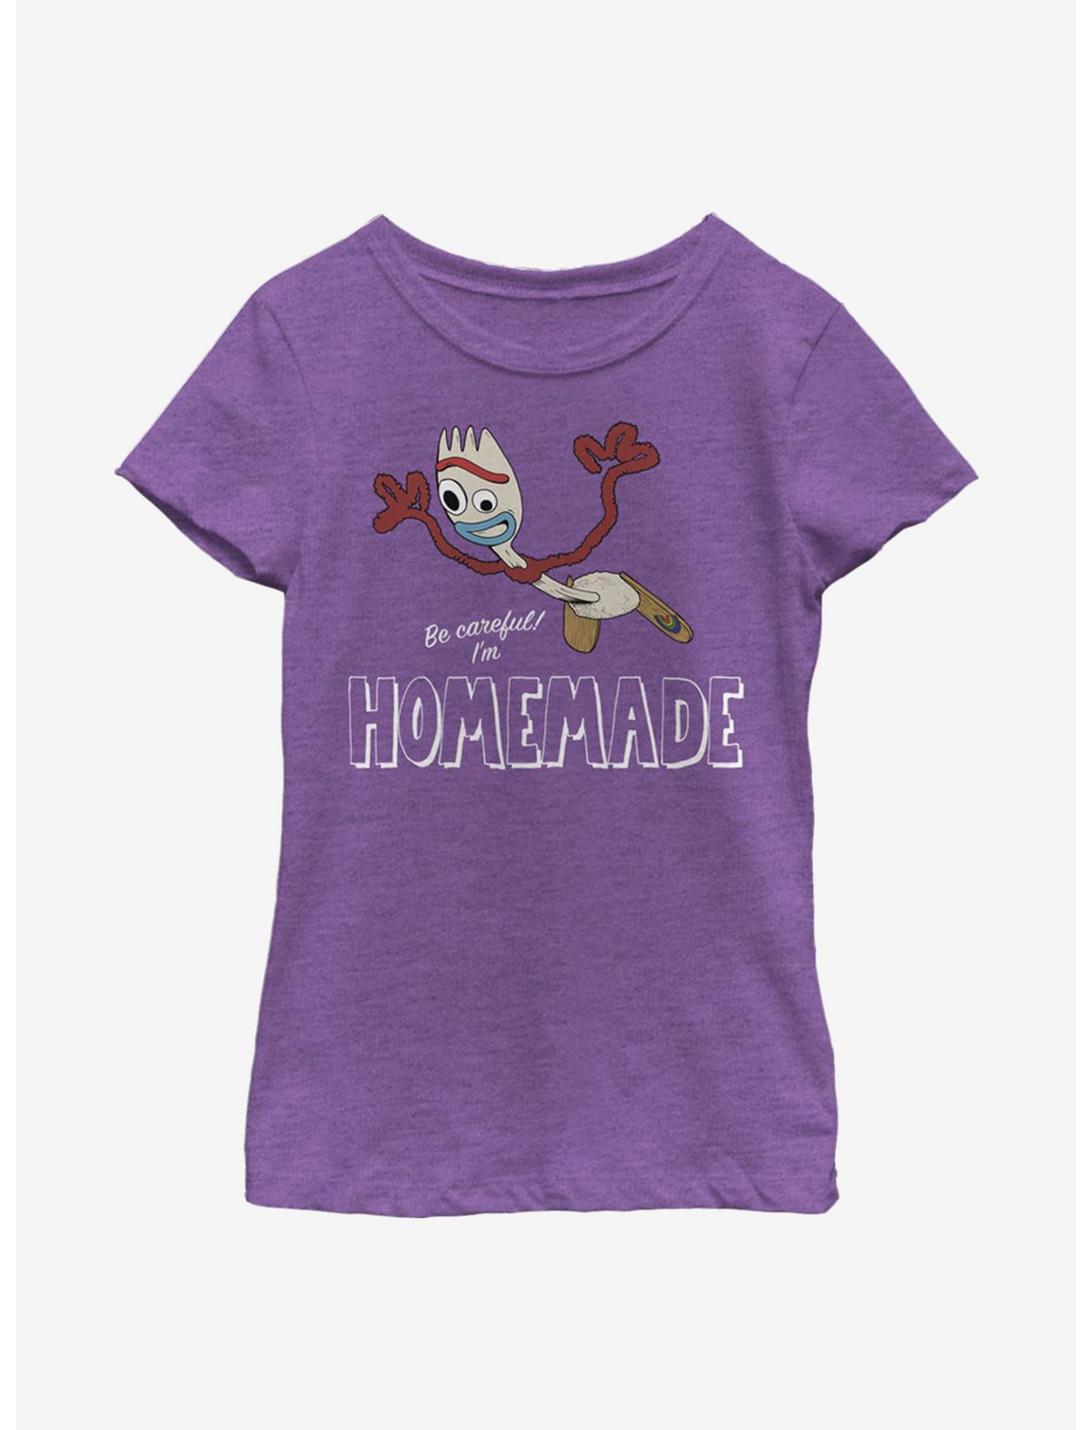 Disney Pixar Toy Story 4 Homemade Two Youth Girls T-Shirt, PURPLE BERRY, hi-res